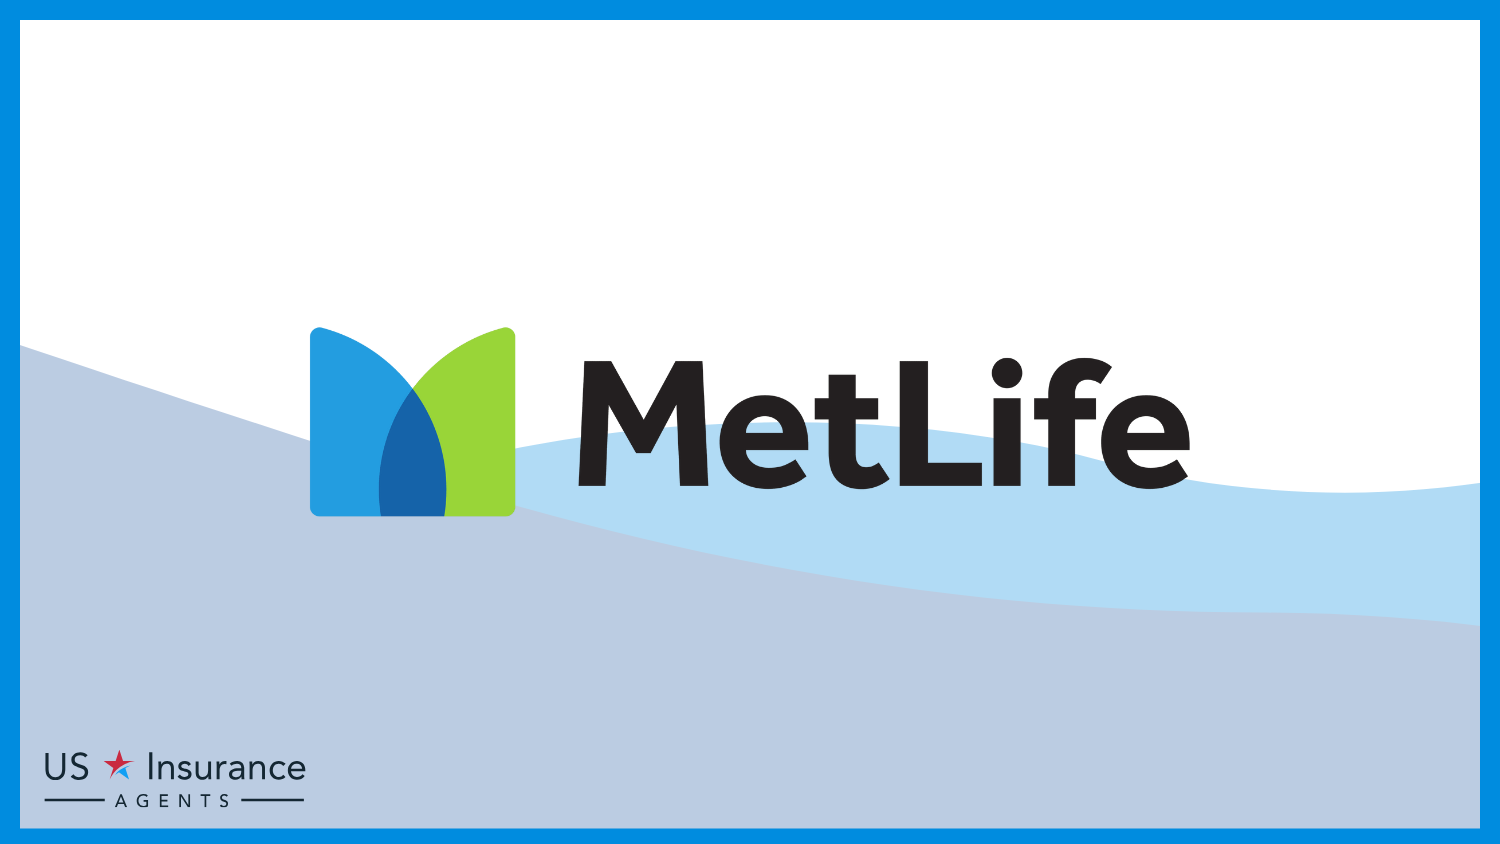 MetLife: Best Life Insurance for Cyclists